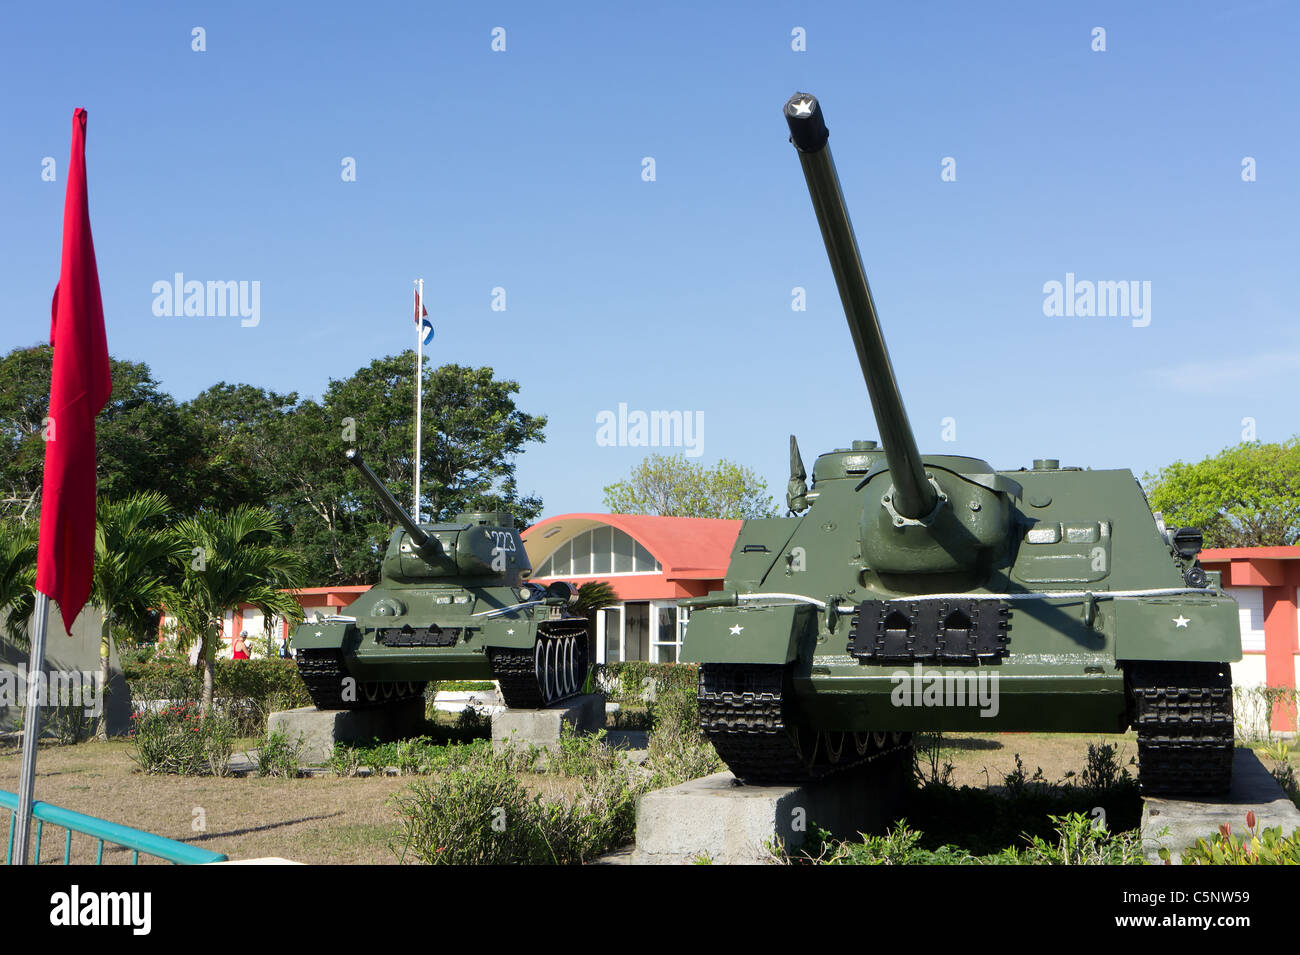 An SU-100 Soviet tank destroyer and a T-34 Soviet tank at the Museum of the Bay of Pigs invasion, Playa Giron, Cuba. Stock Photo